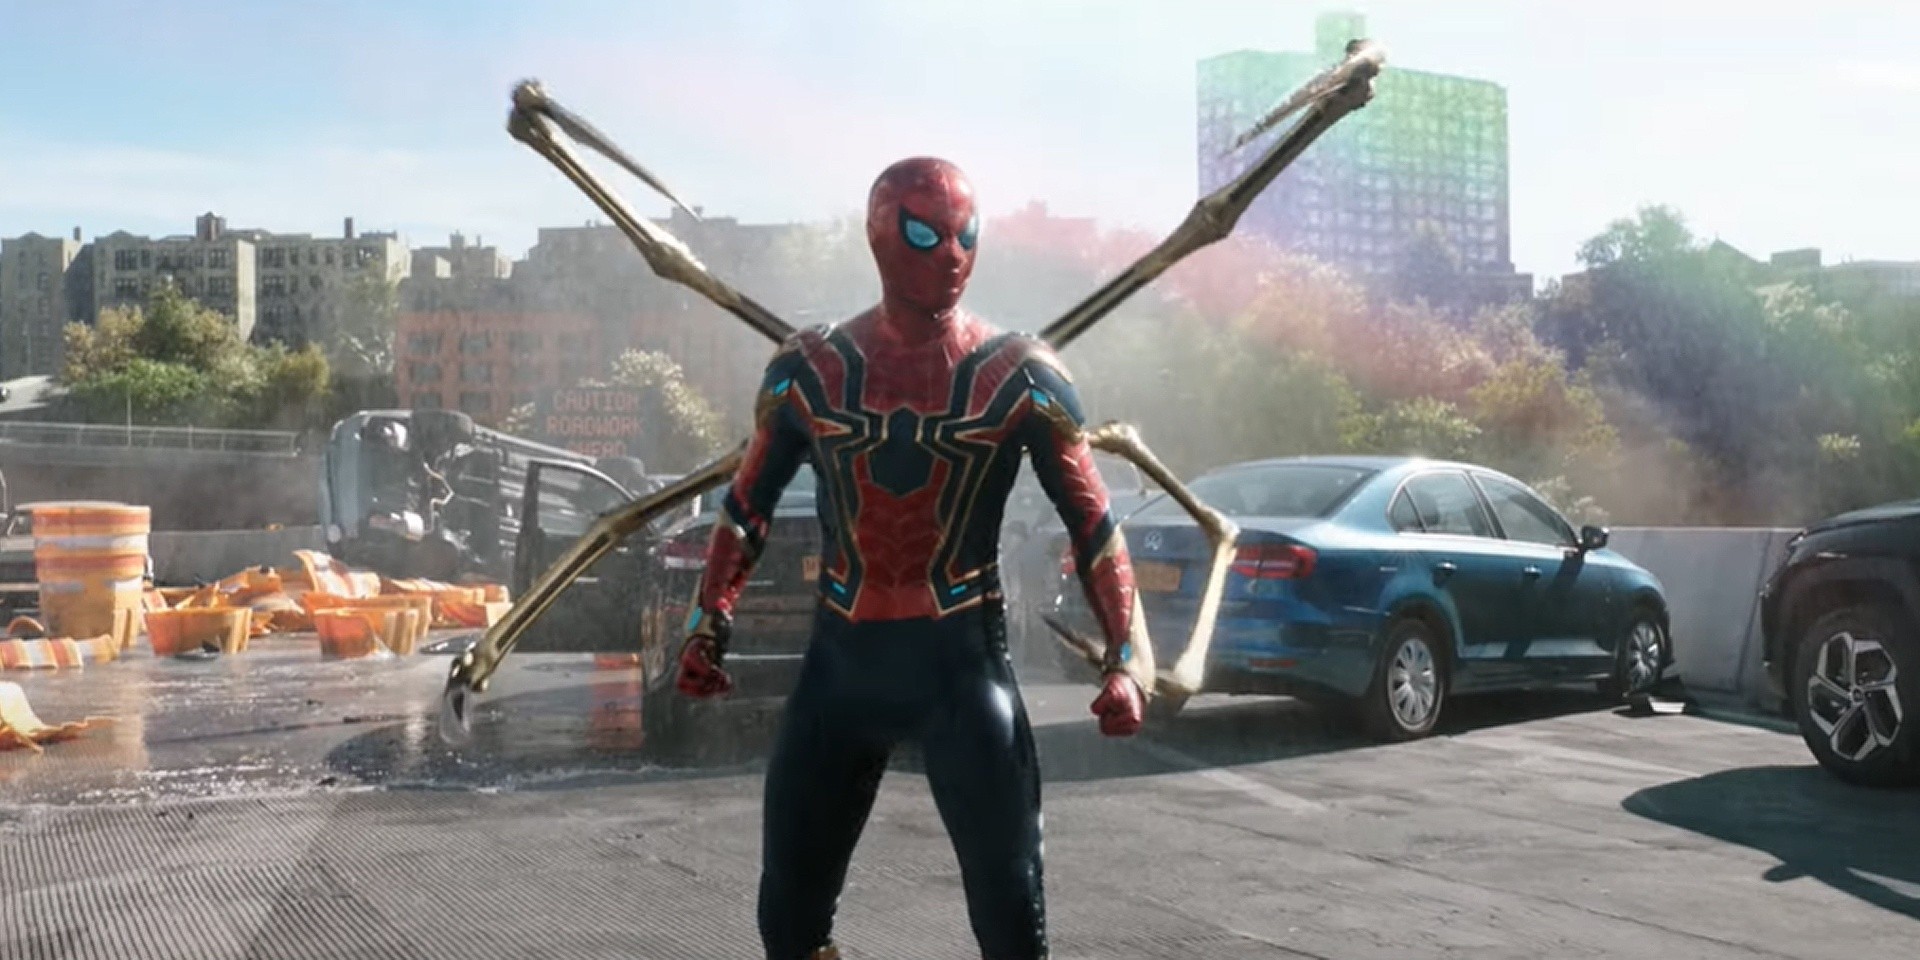 Spider-Man and Dr. Strange bend time and face Doc Ock in new 'No Way Home' trailer – watch